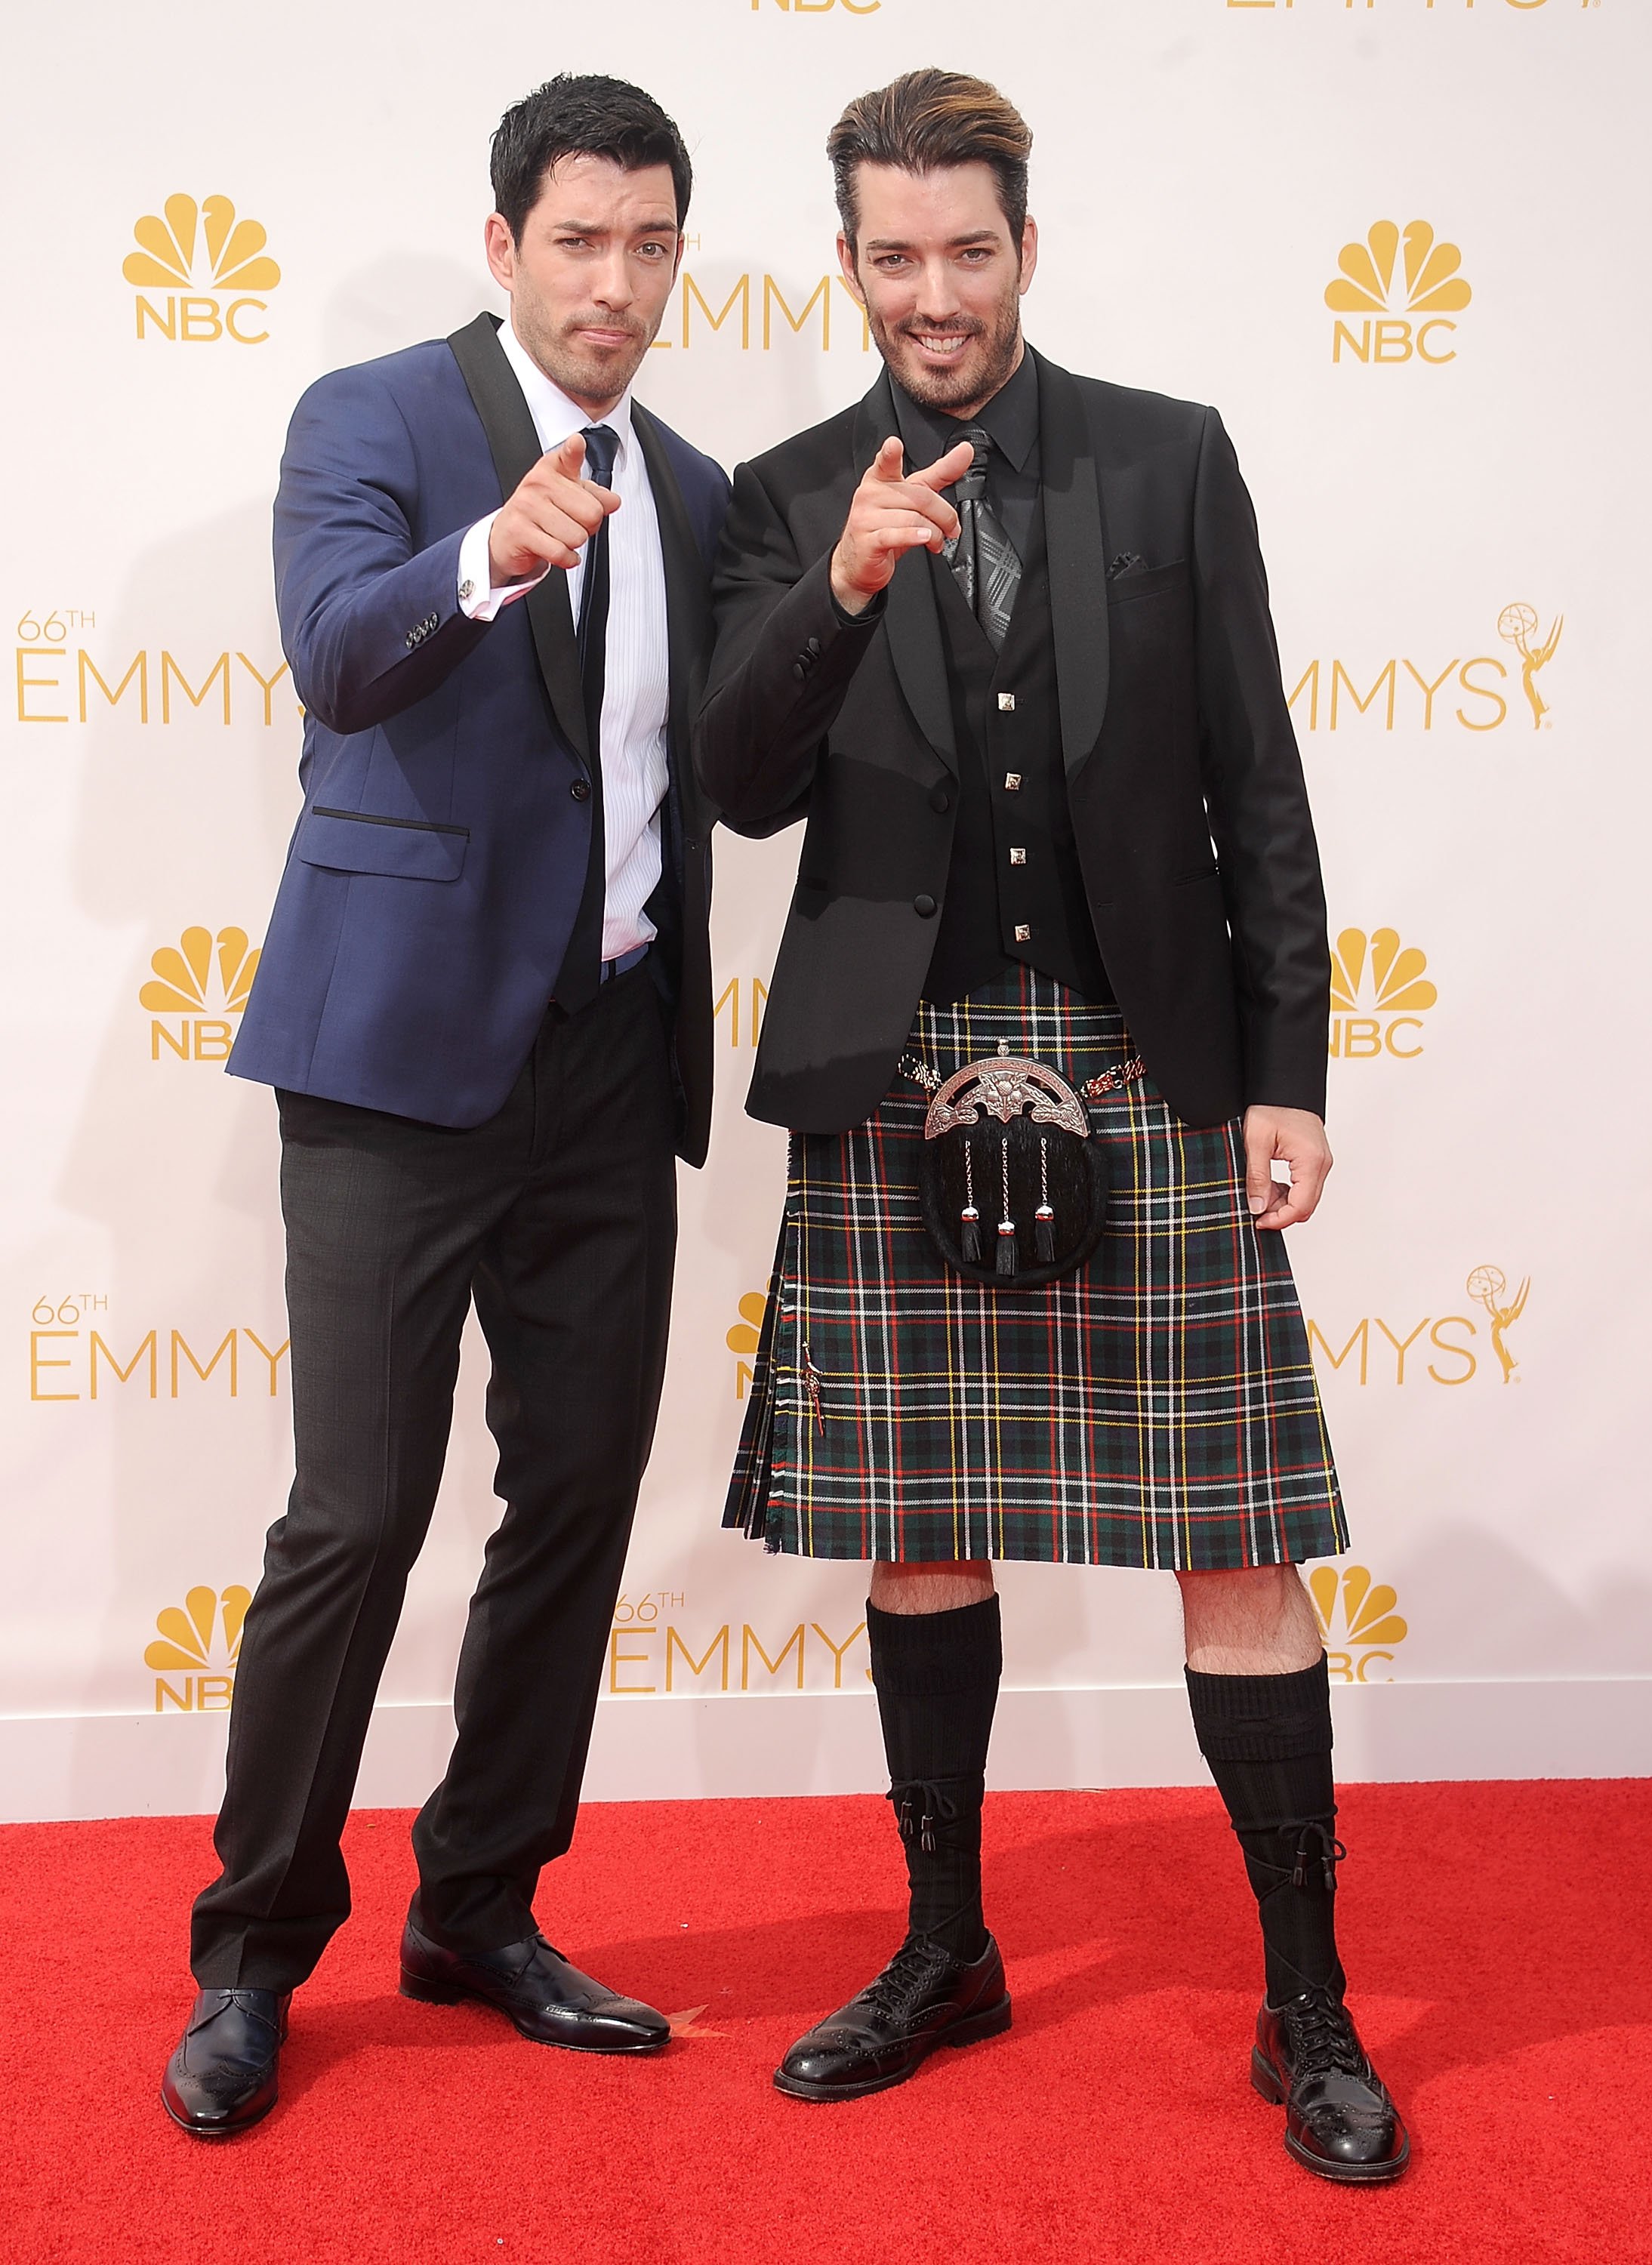 TV personalities Drew Scott and Jonathan Scott arrive at the 66th Annual Primetime Emmy Awards at Nokia Theater LA Live on August 25, 2014 in Los Angeles, California | Source: Getty Images